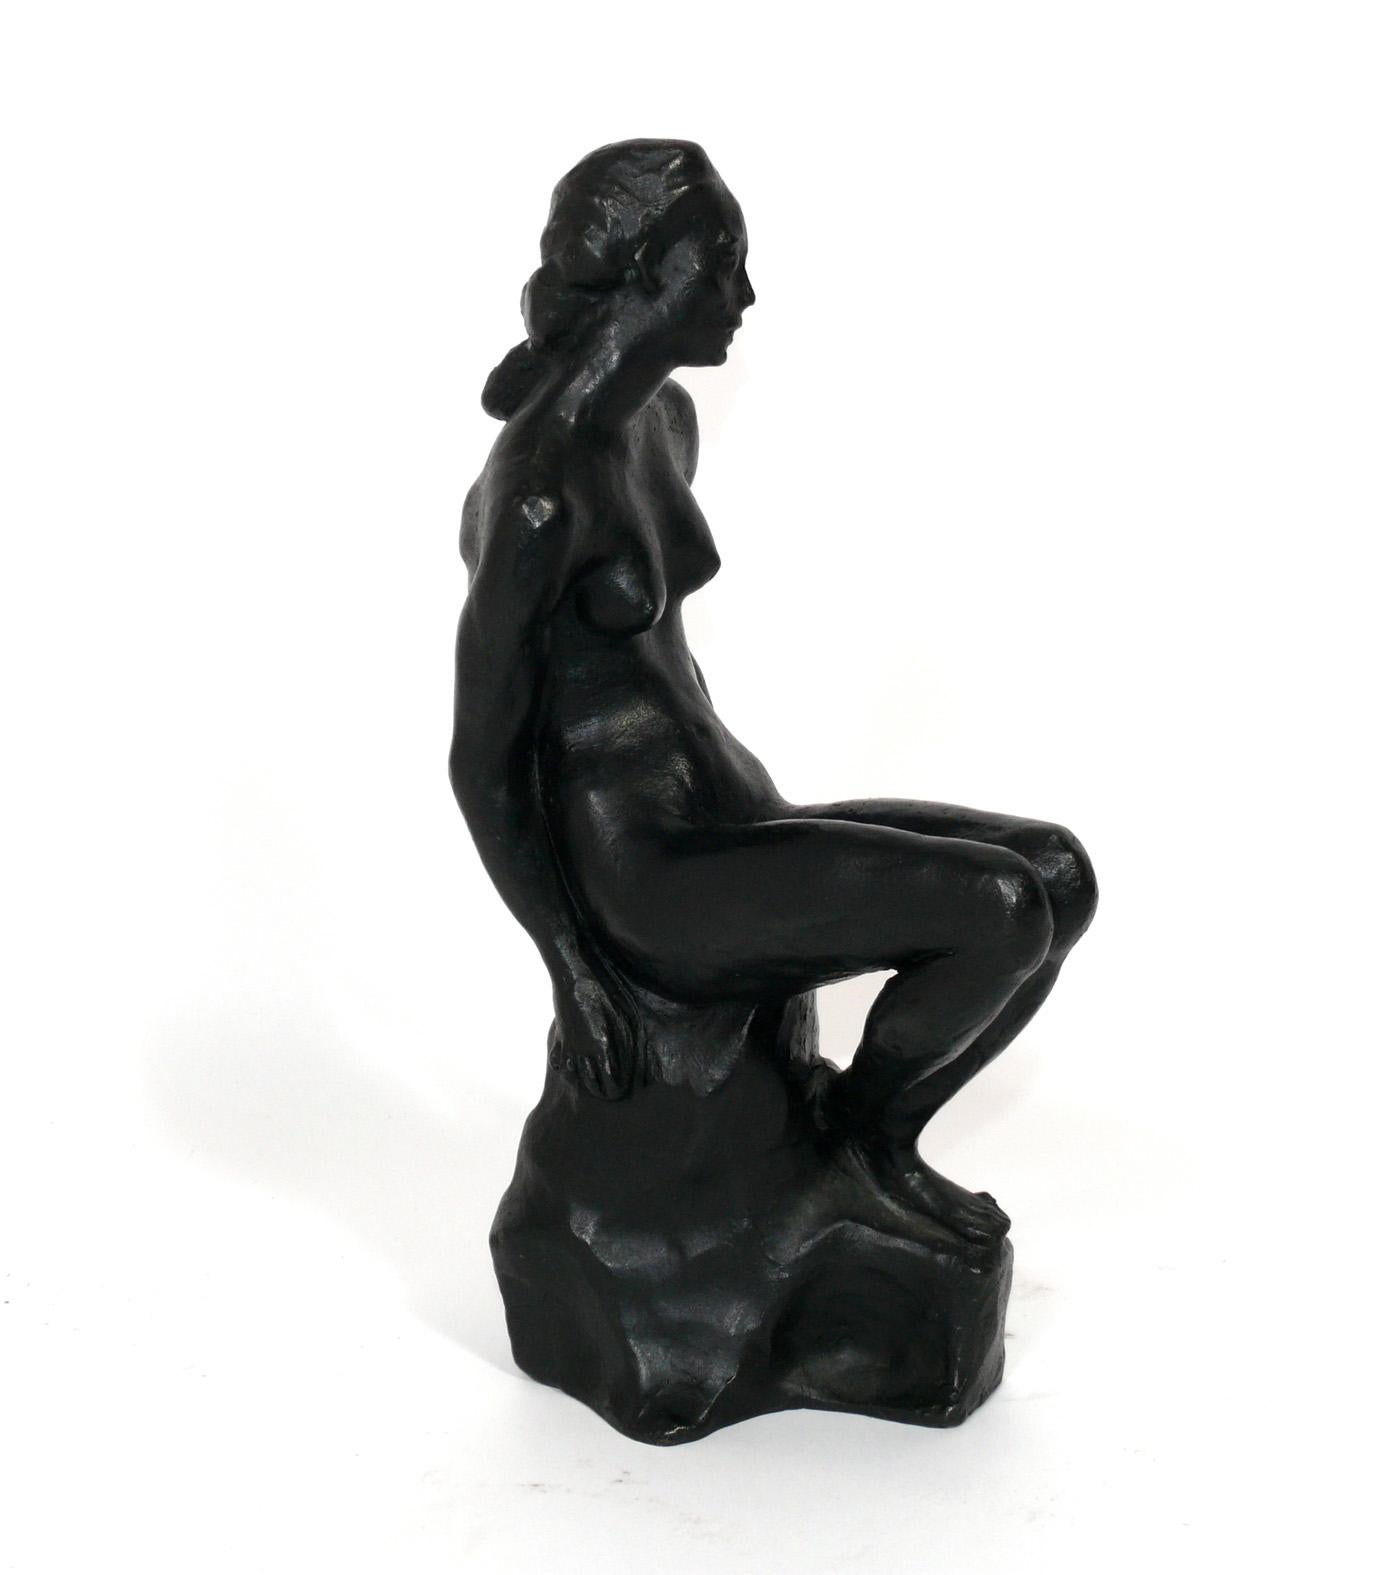 Ettore Greco bronze nude female sculpture, Italy, circa 1990s. Signed at base, see detail photo. Retains warm original patina. Comes with a Greco book from the gallery where the sculpture was purchased.